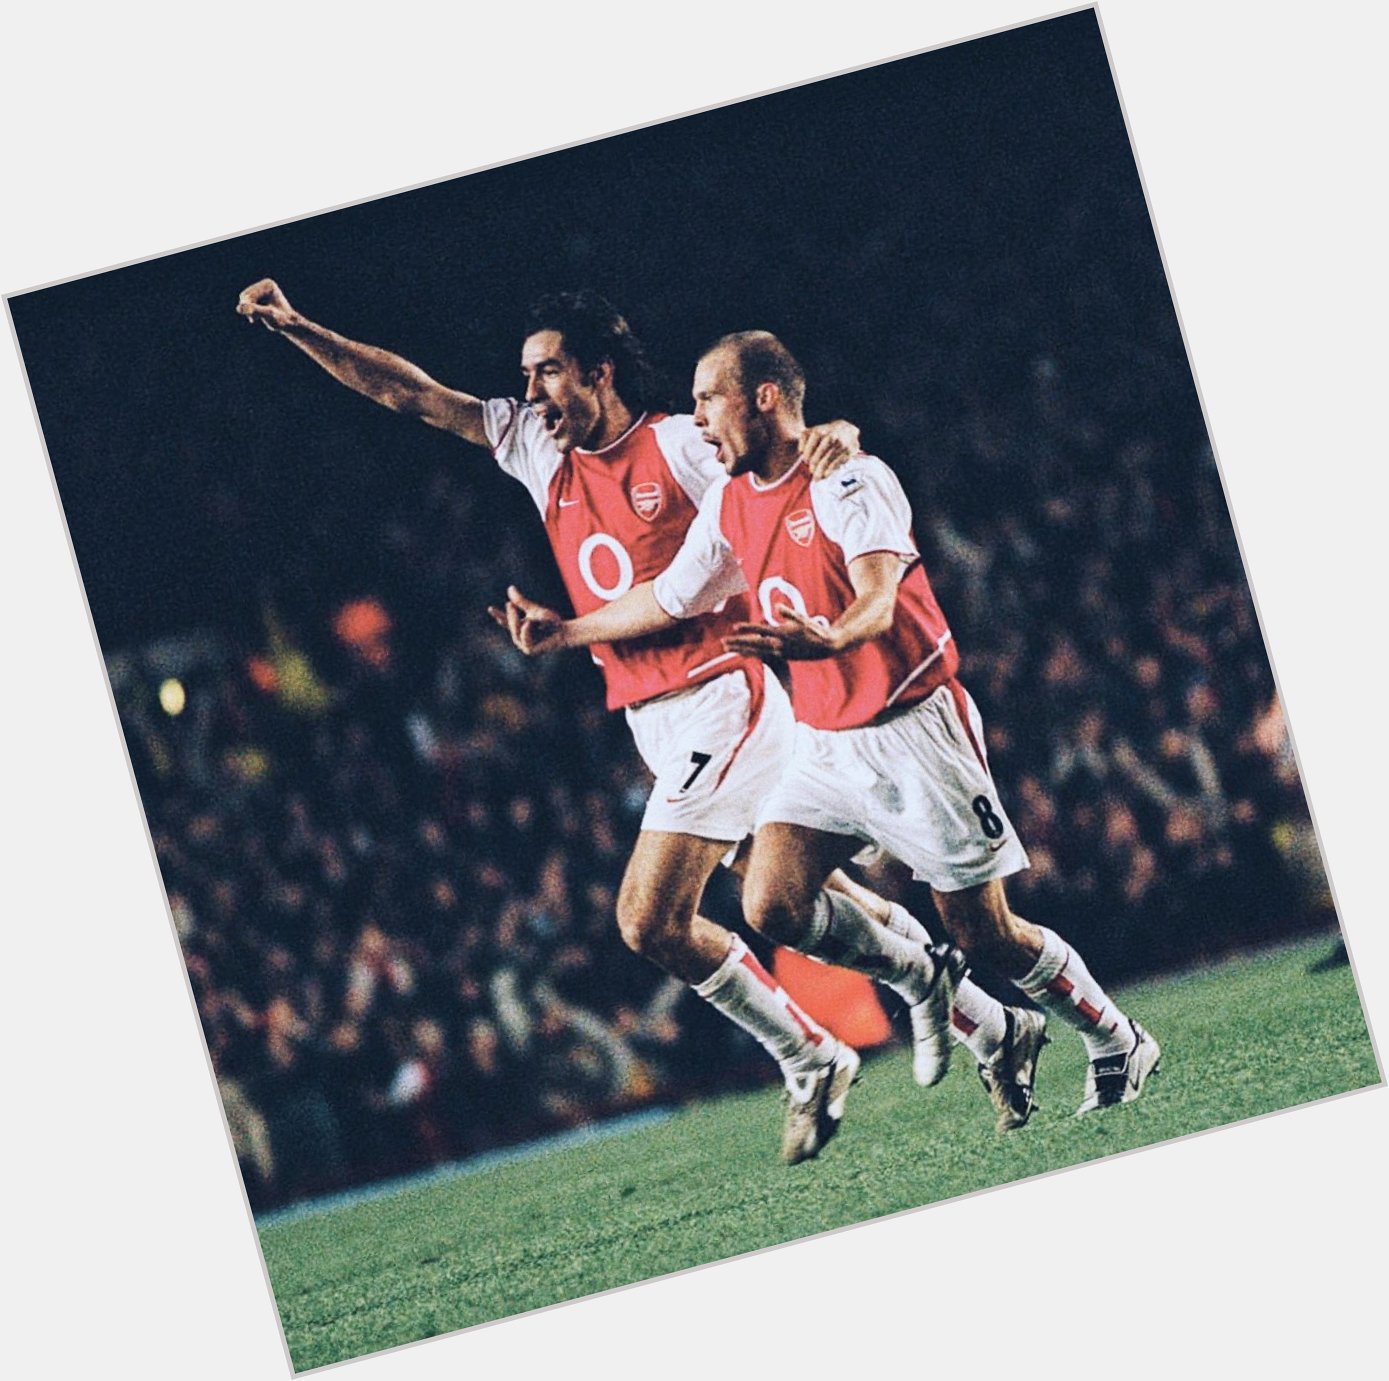 FA Cup  Premier League  World Cup Happy 46th birthday to Robert Pires!

( : 